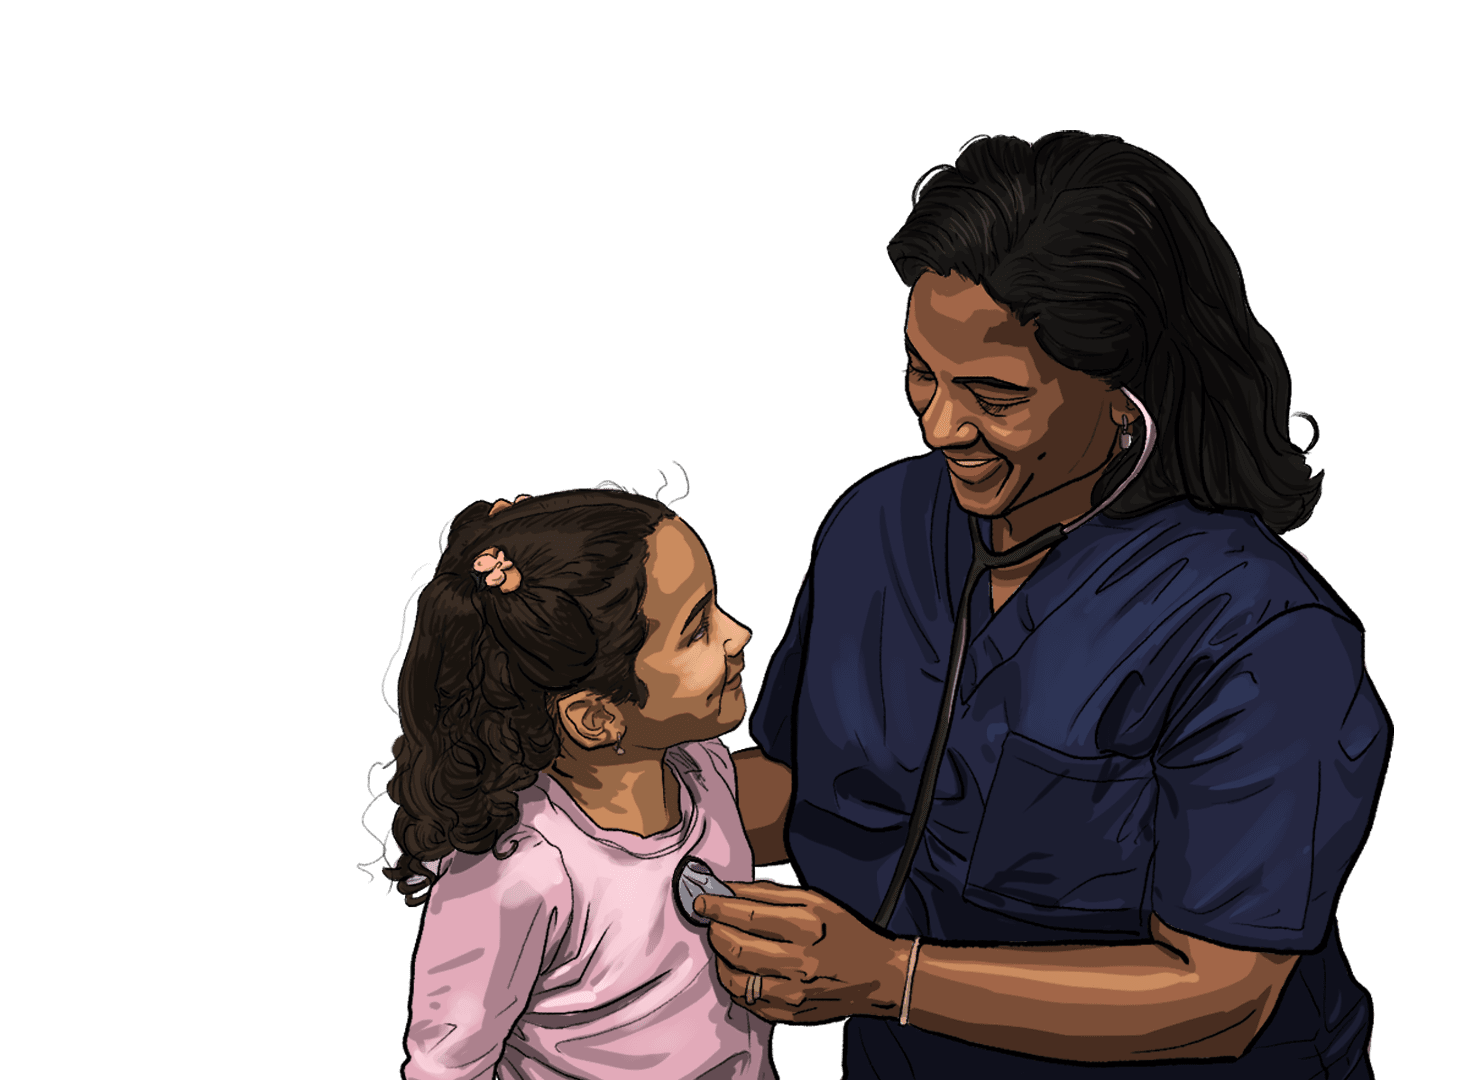 A sketch of a Medical Assistant listening to a child&#039;s heartbeat through a stethoscope, which is becoming more realistic.